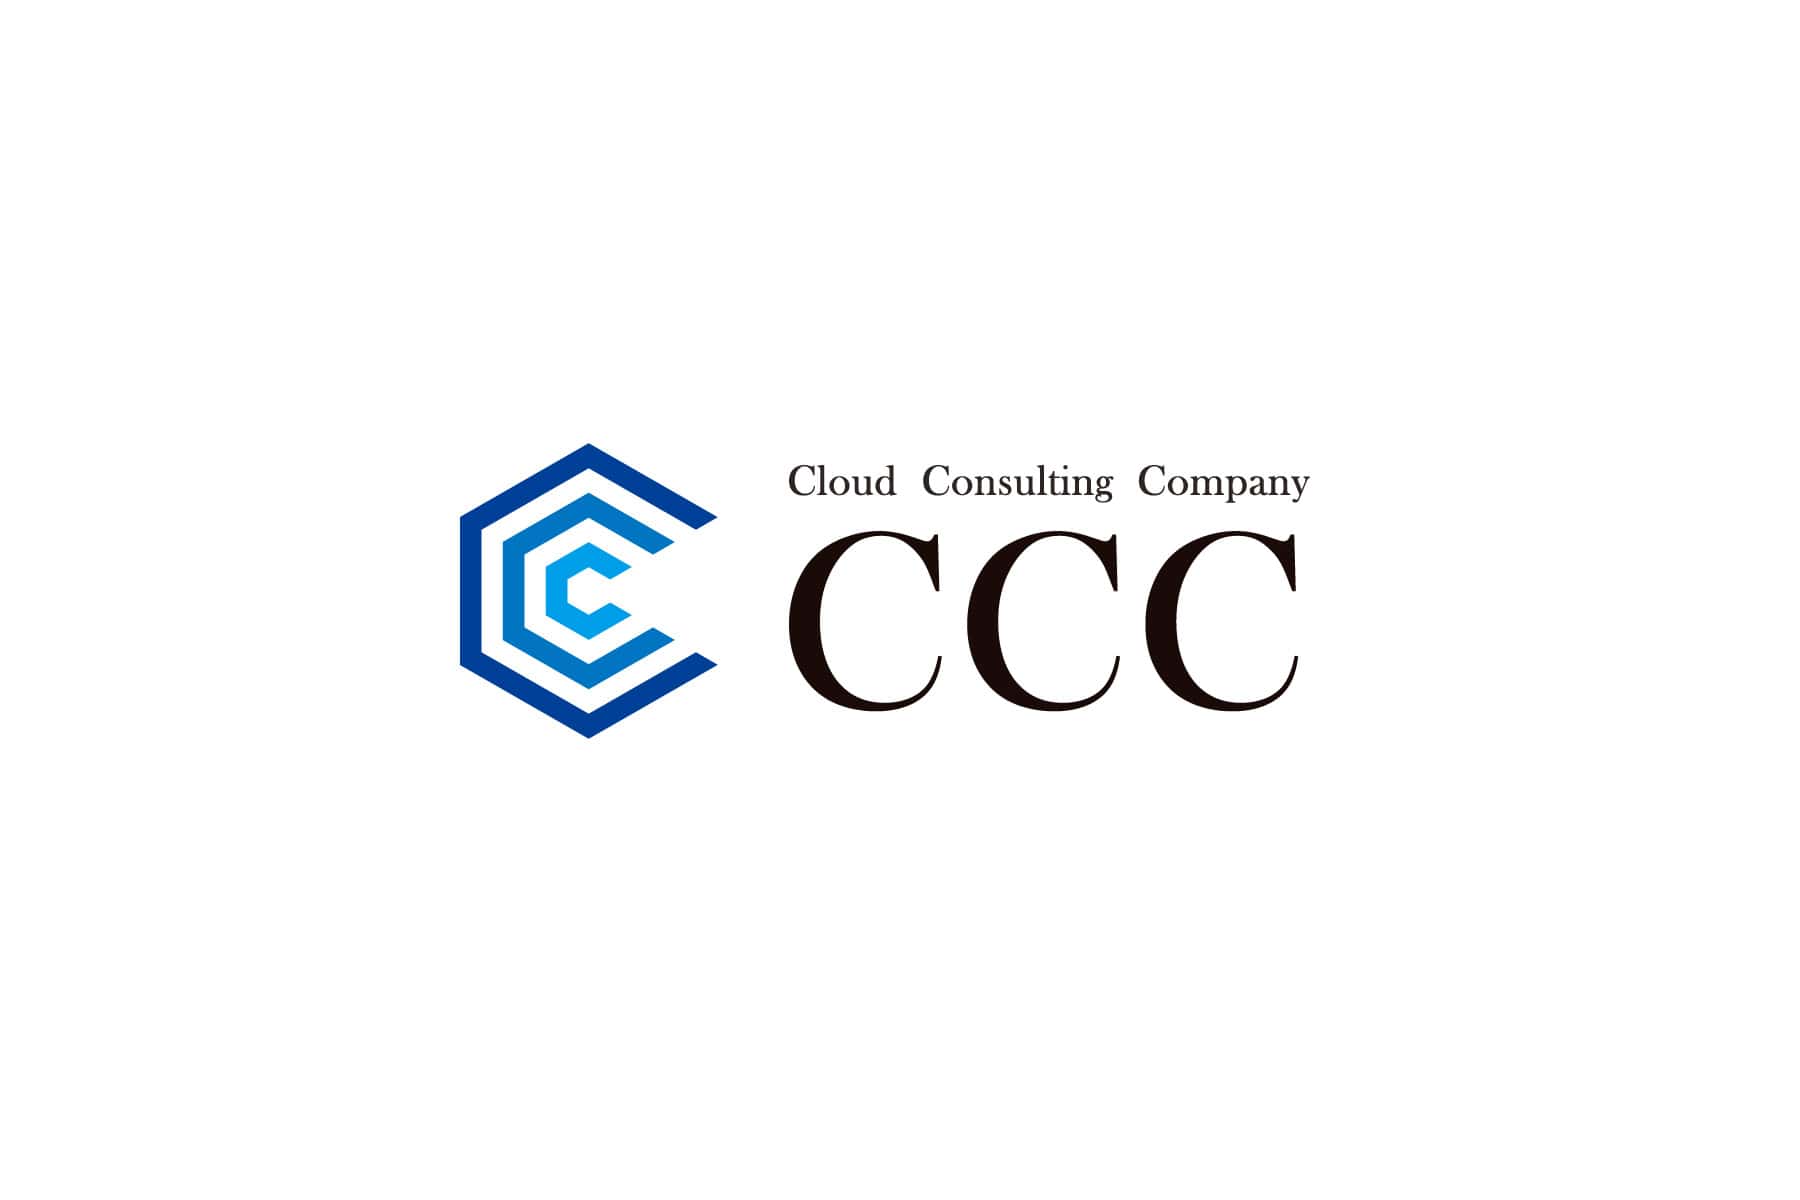 Cloud Consulting Company／ロゴ